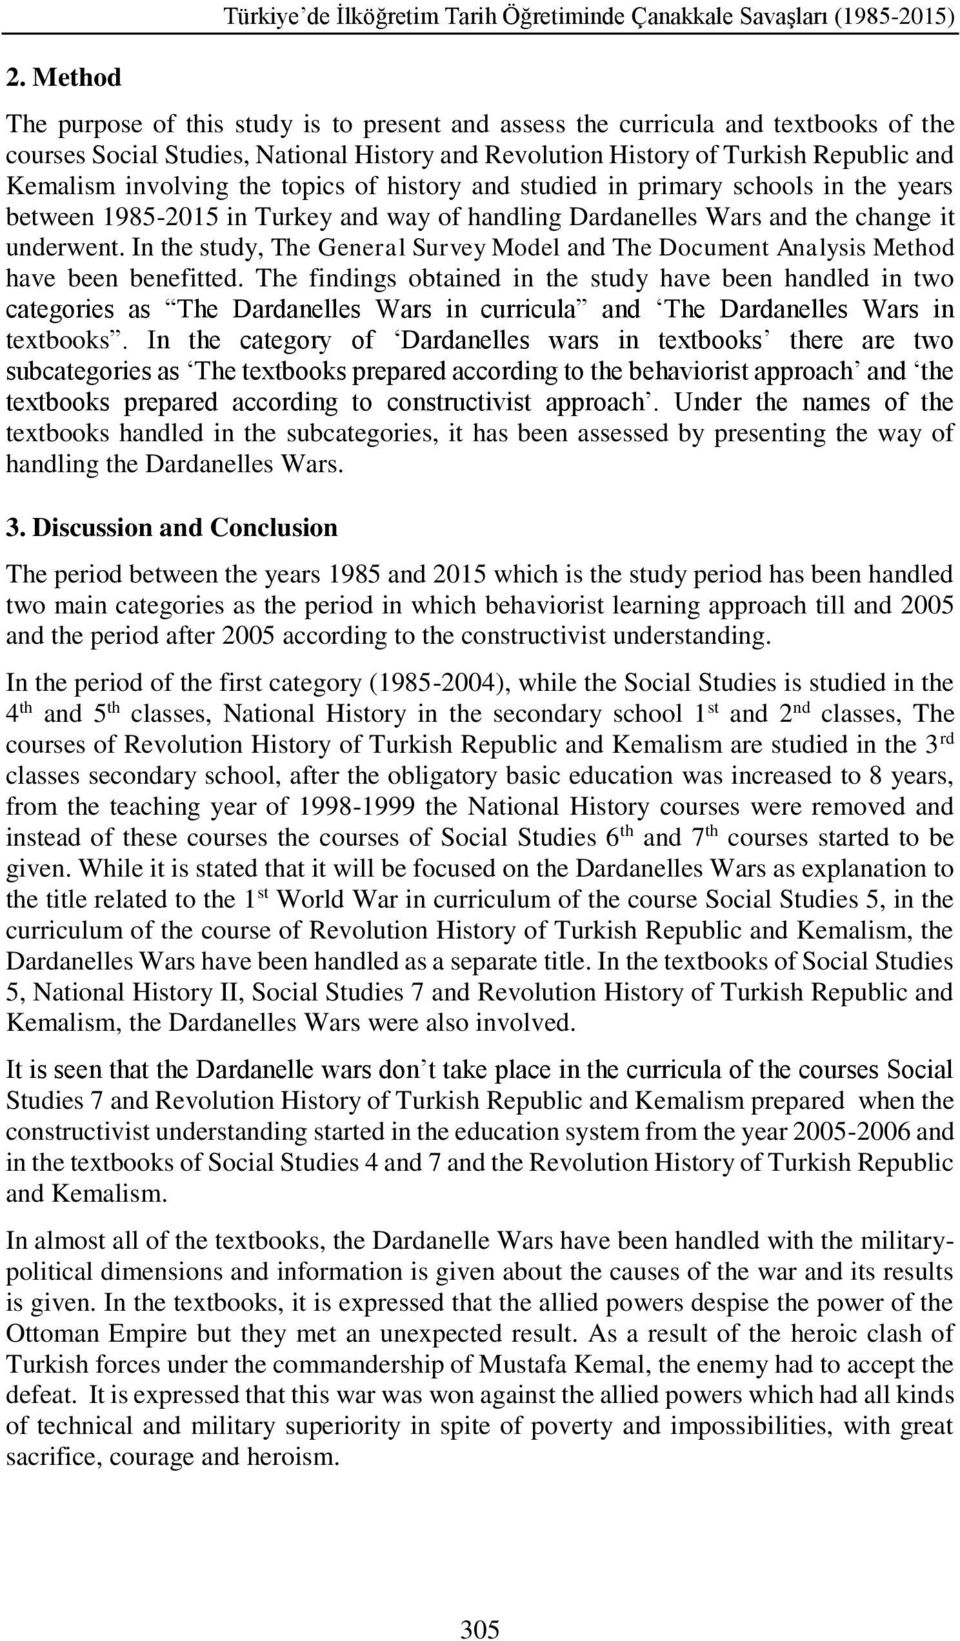 Dardanelles Wars and the change it underwent. In the study, The General Survey Model and The Document Analysis Method have been benefitted.